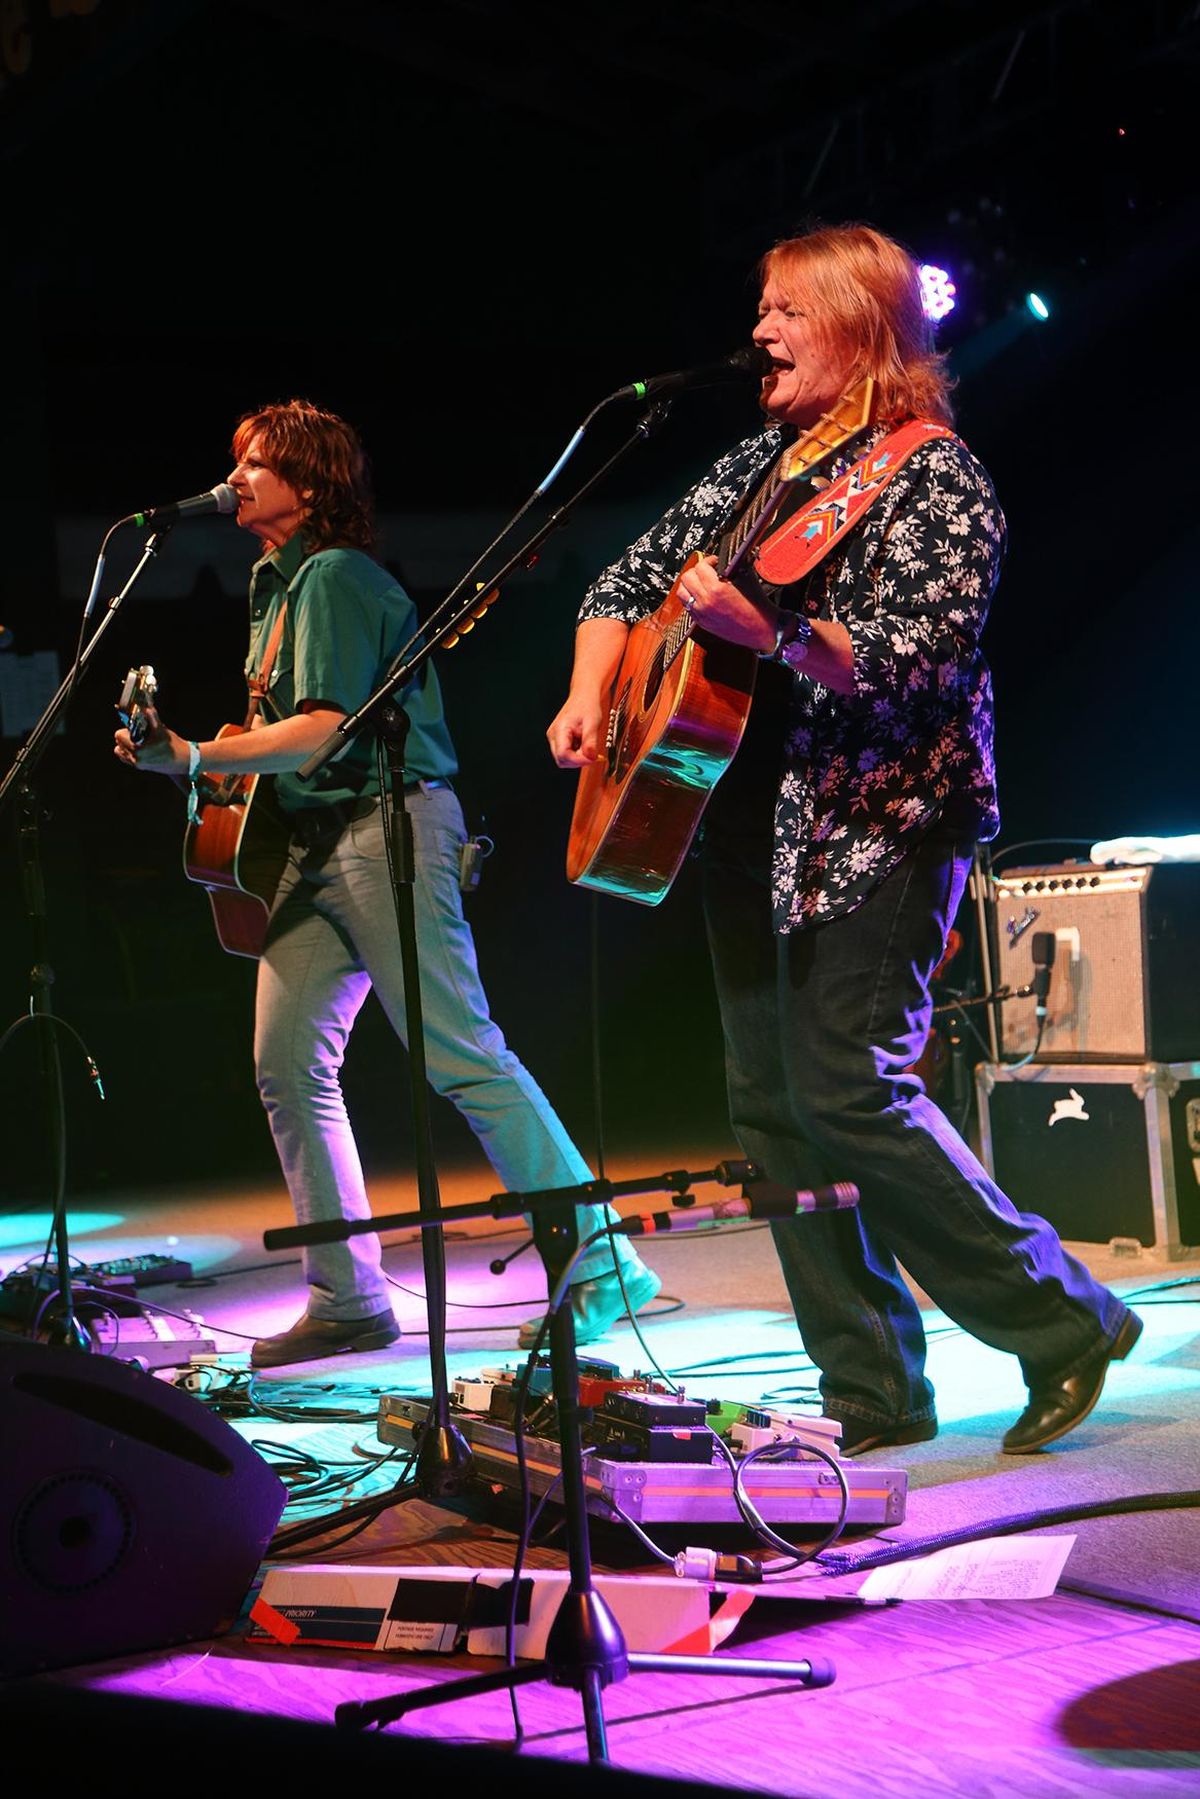 Amy Ray (L) and Emily Saliers and the Indigo Girls perform at Magnolia Fest at the Spirit of Suwannee Music Park in Live Oak Florida on Saturday. October 18, 2014. (Photo by John Davisson/Invision/AP) (John Davisson / John Davisson/Invision/AP)